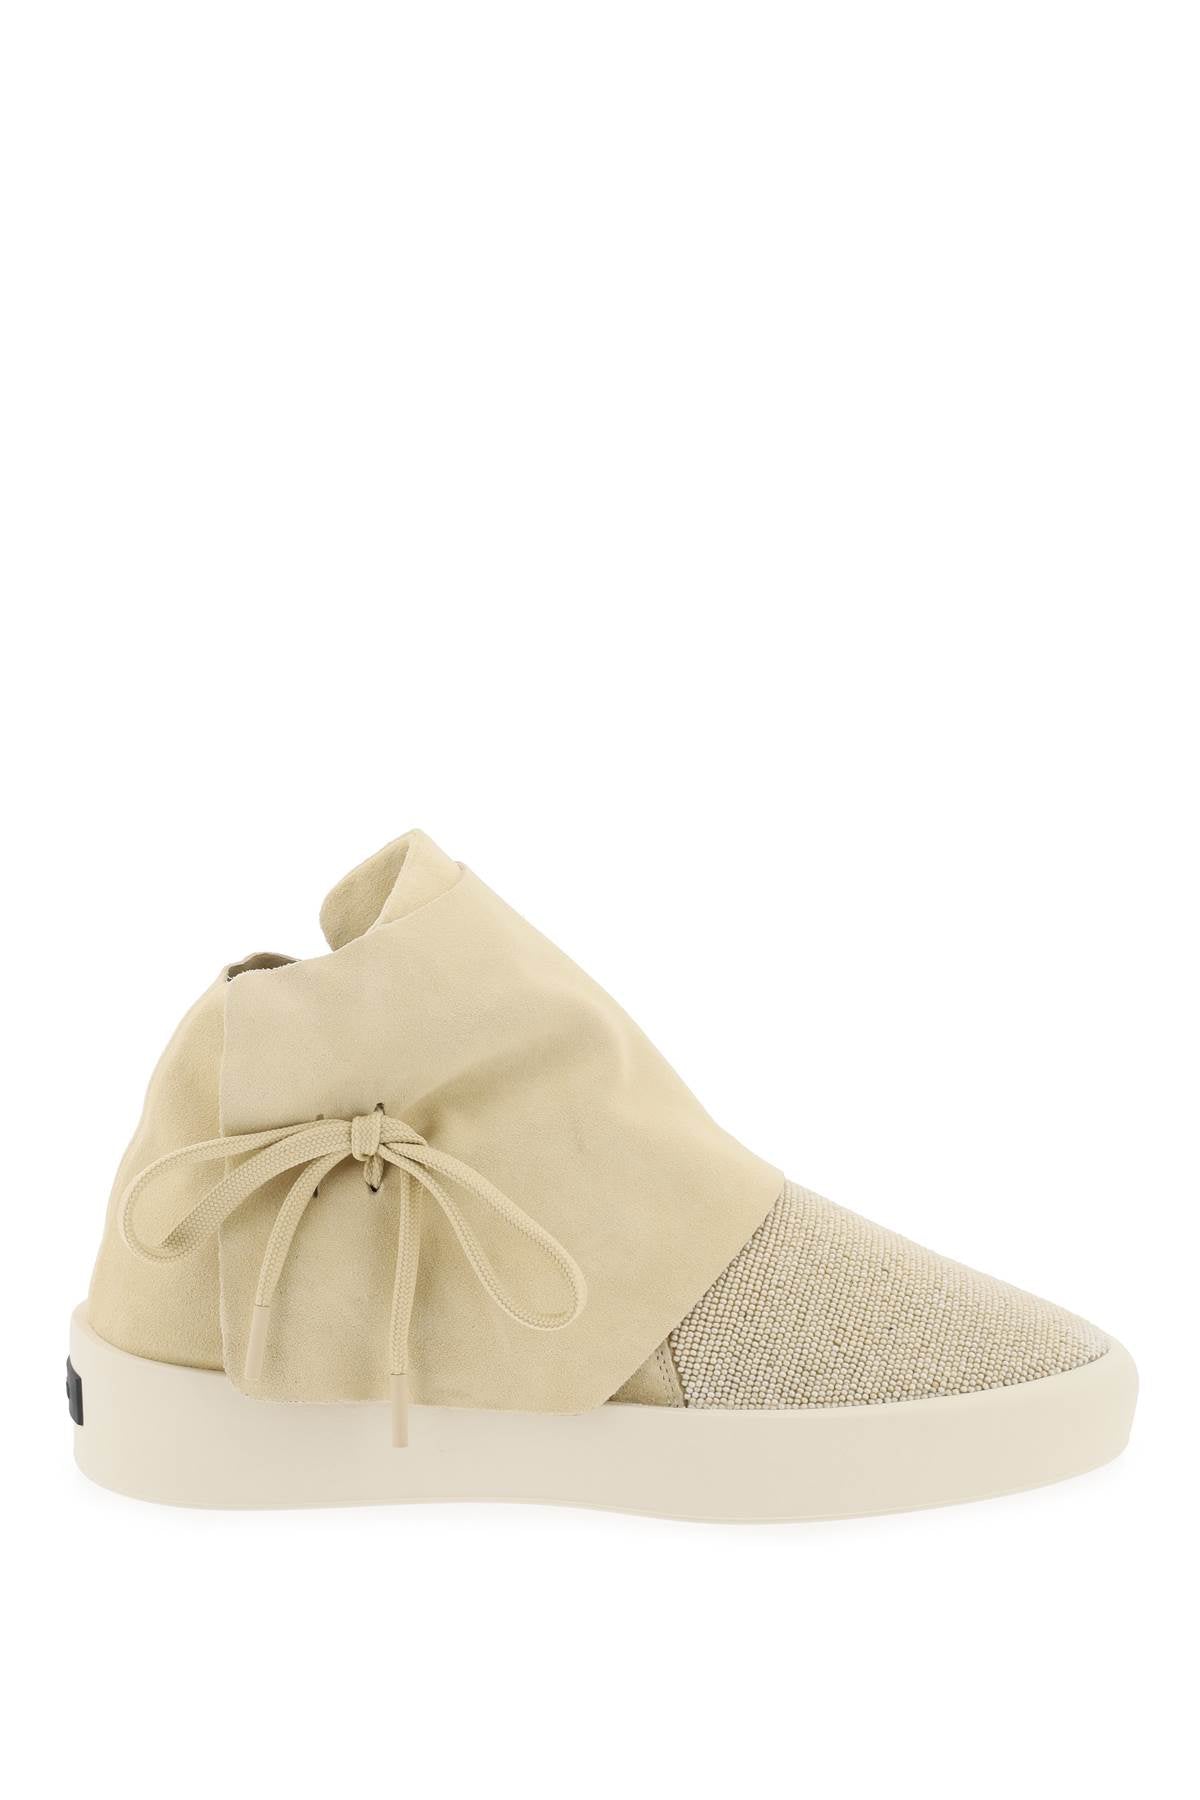 Fear of god mid-top suede and bead sneakers.-0